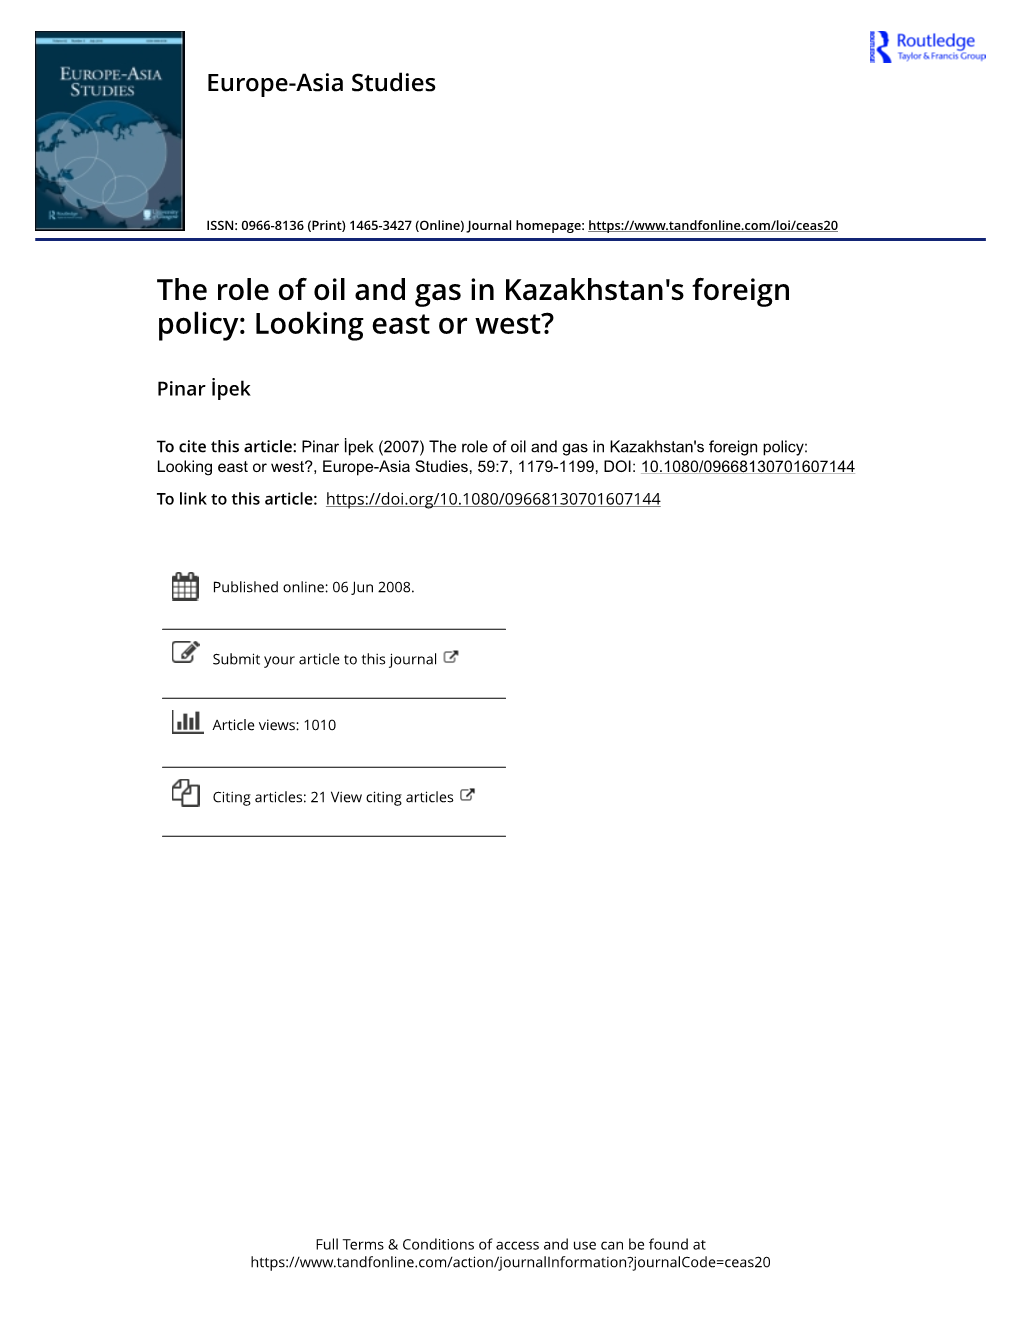 The Role of Oil and Gas in Kazakhstan's Foreign Policy: Looking East Or West?